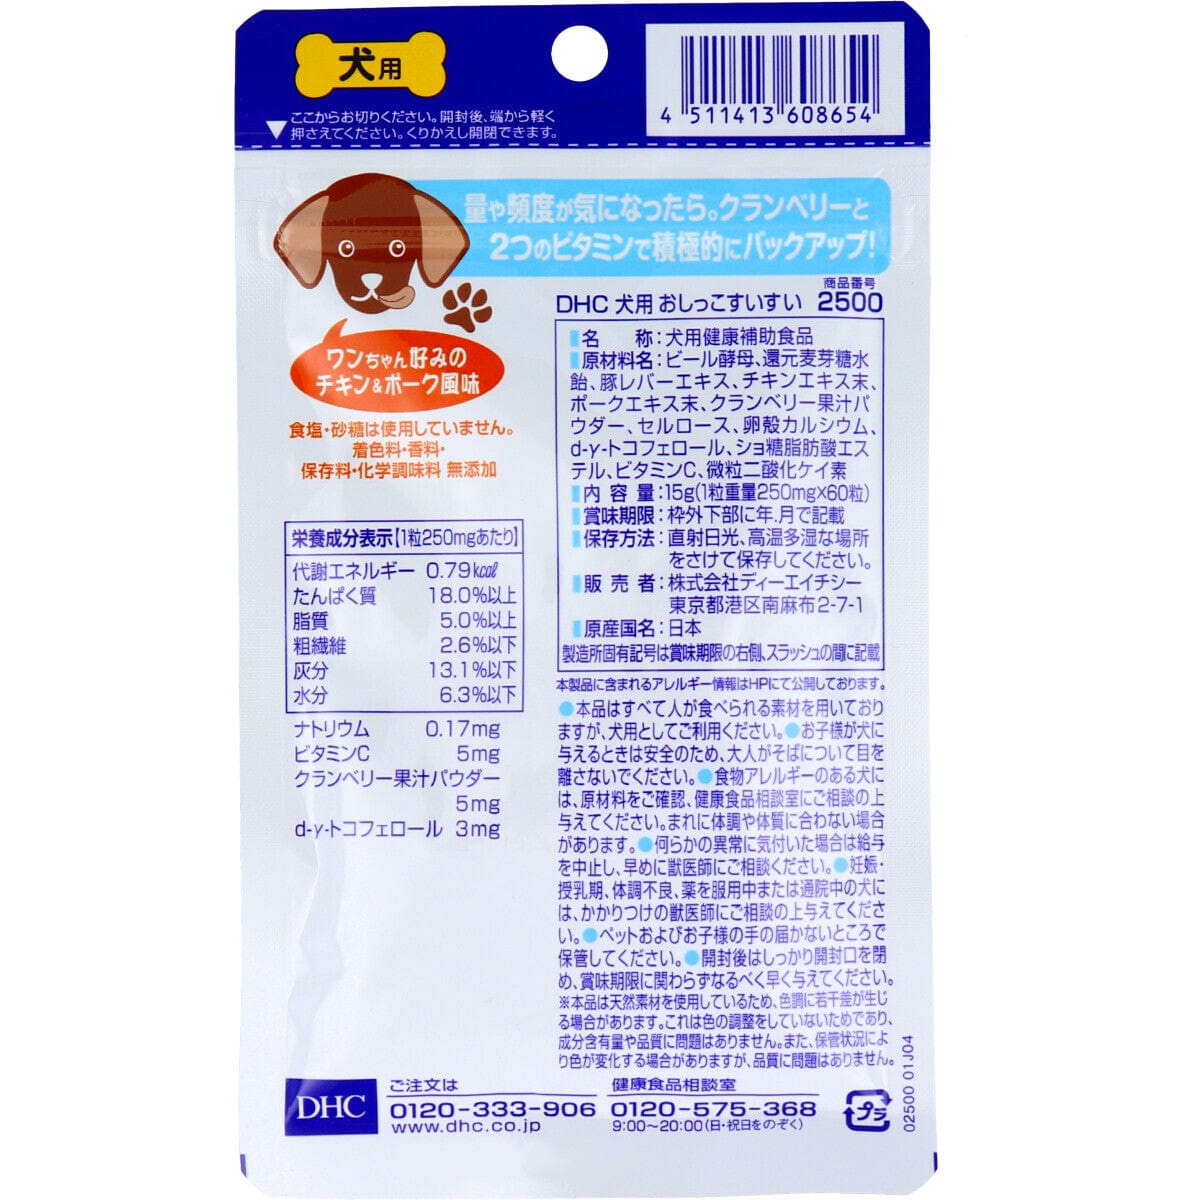 DHC - Urinal Tract SuiSui Health Food Supplement for Pet Dogs (60 Tablets) -  Pet Dog Supplements  Durio.sg